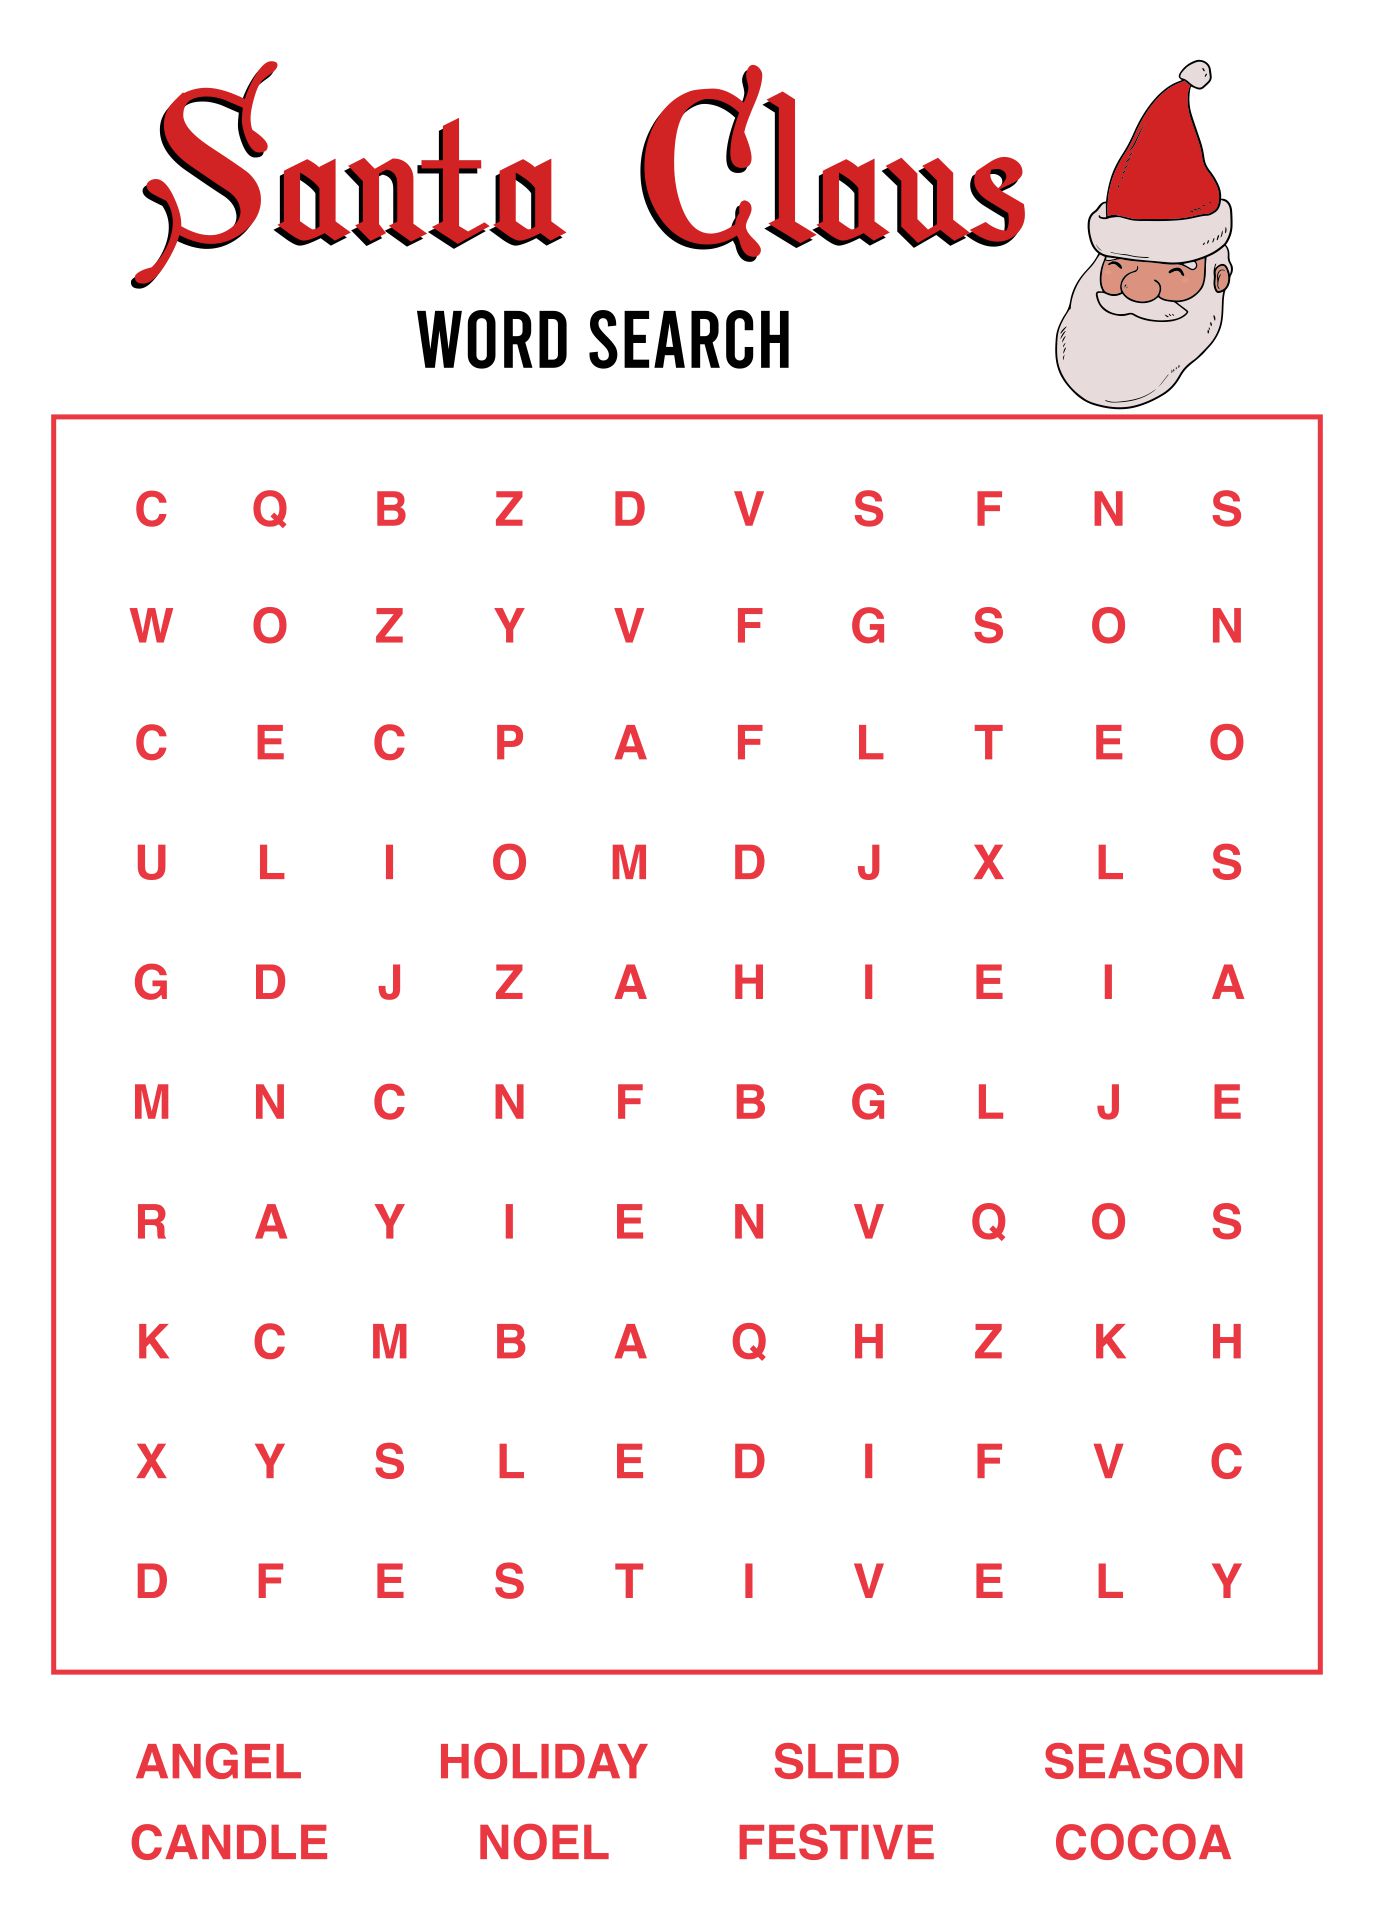 Printable Christmas Word Search Puzzle